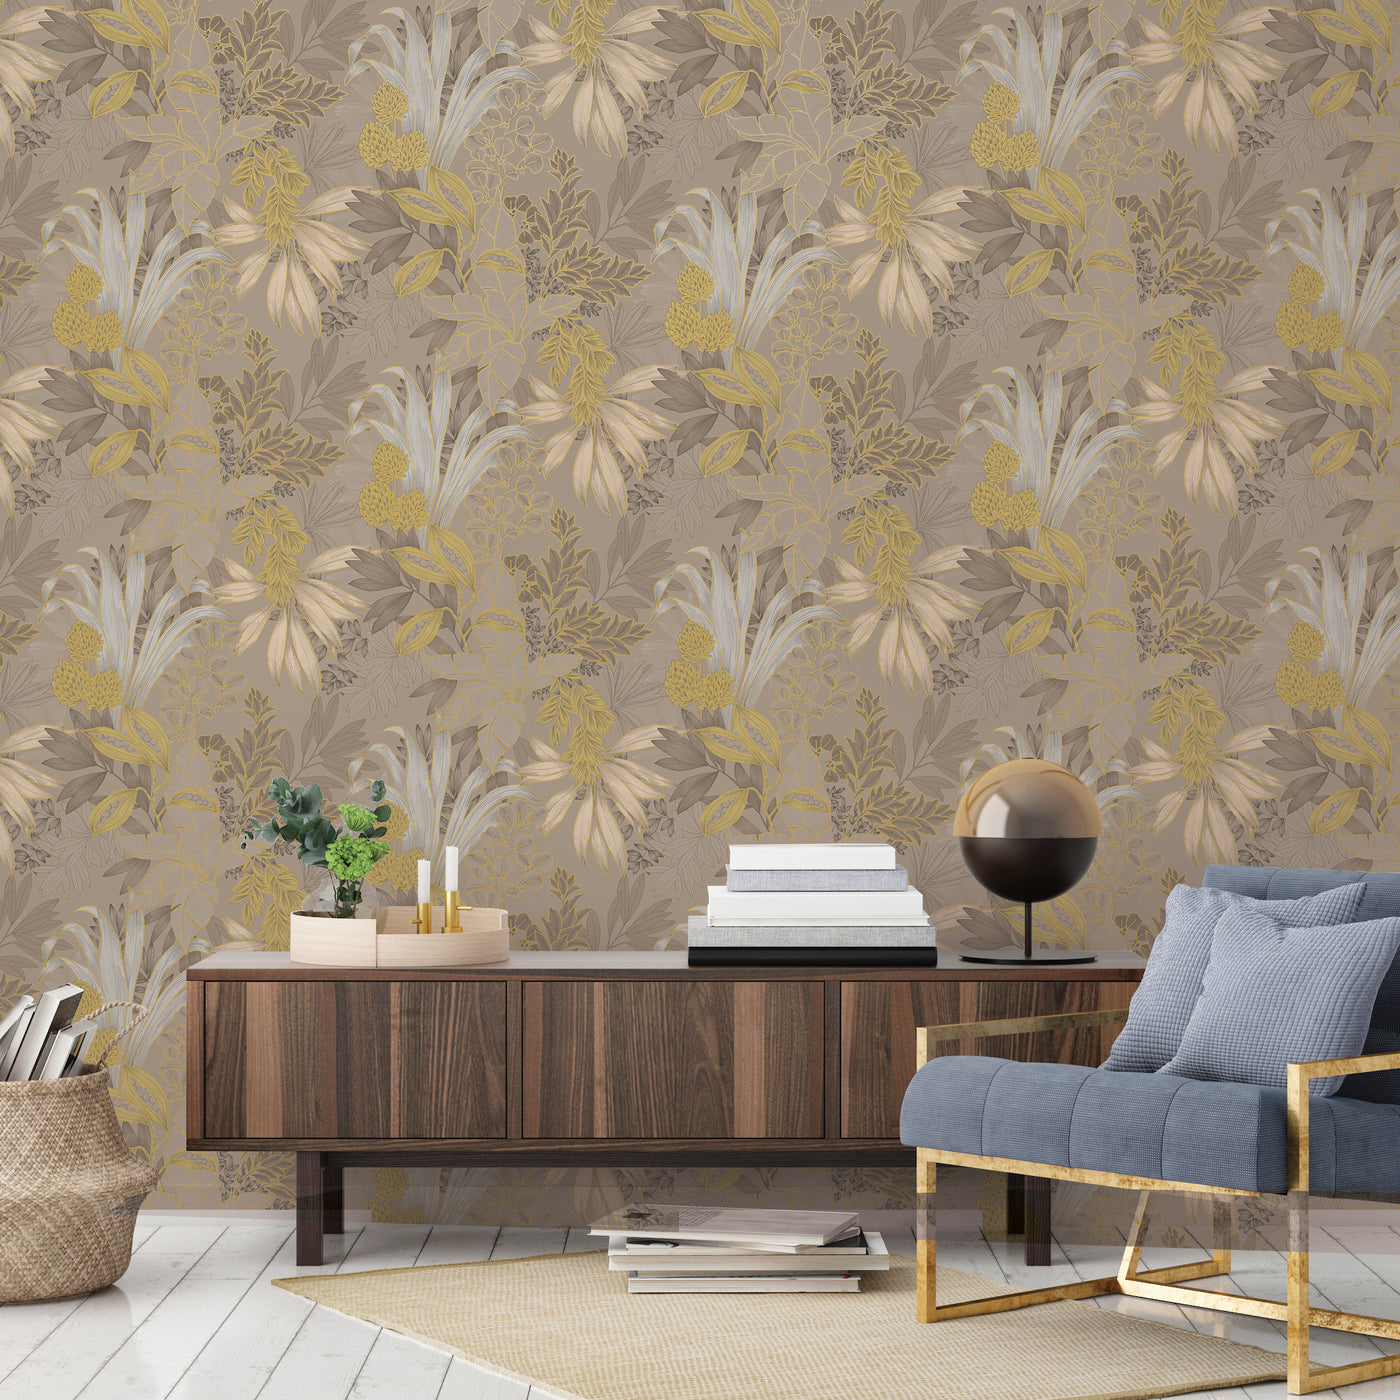 Coniferous Floral Unpasted Wallpaper - Coniferous Floral Non-Pasted Wallpaper in hazelwood behind a sideboard | Tempaper#color_hazelwood